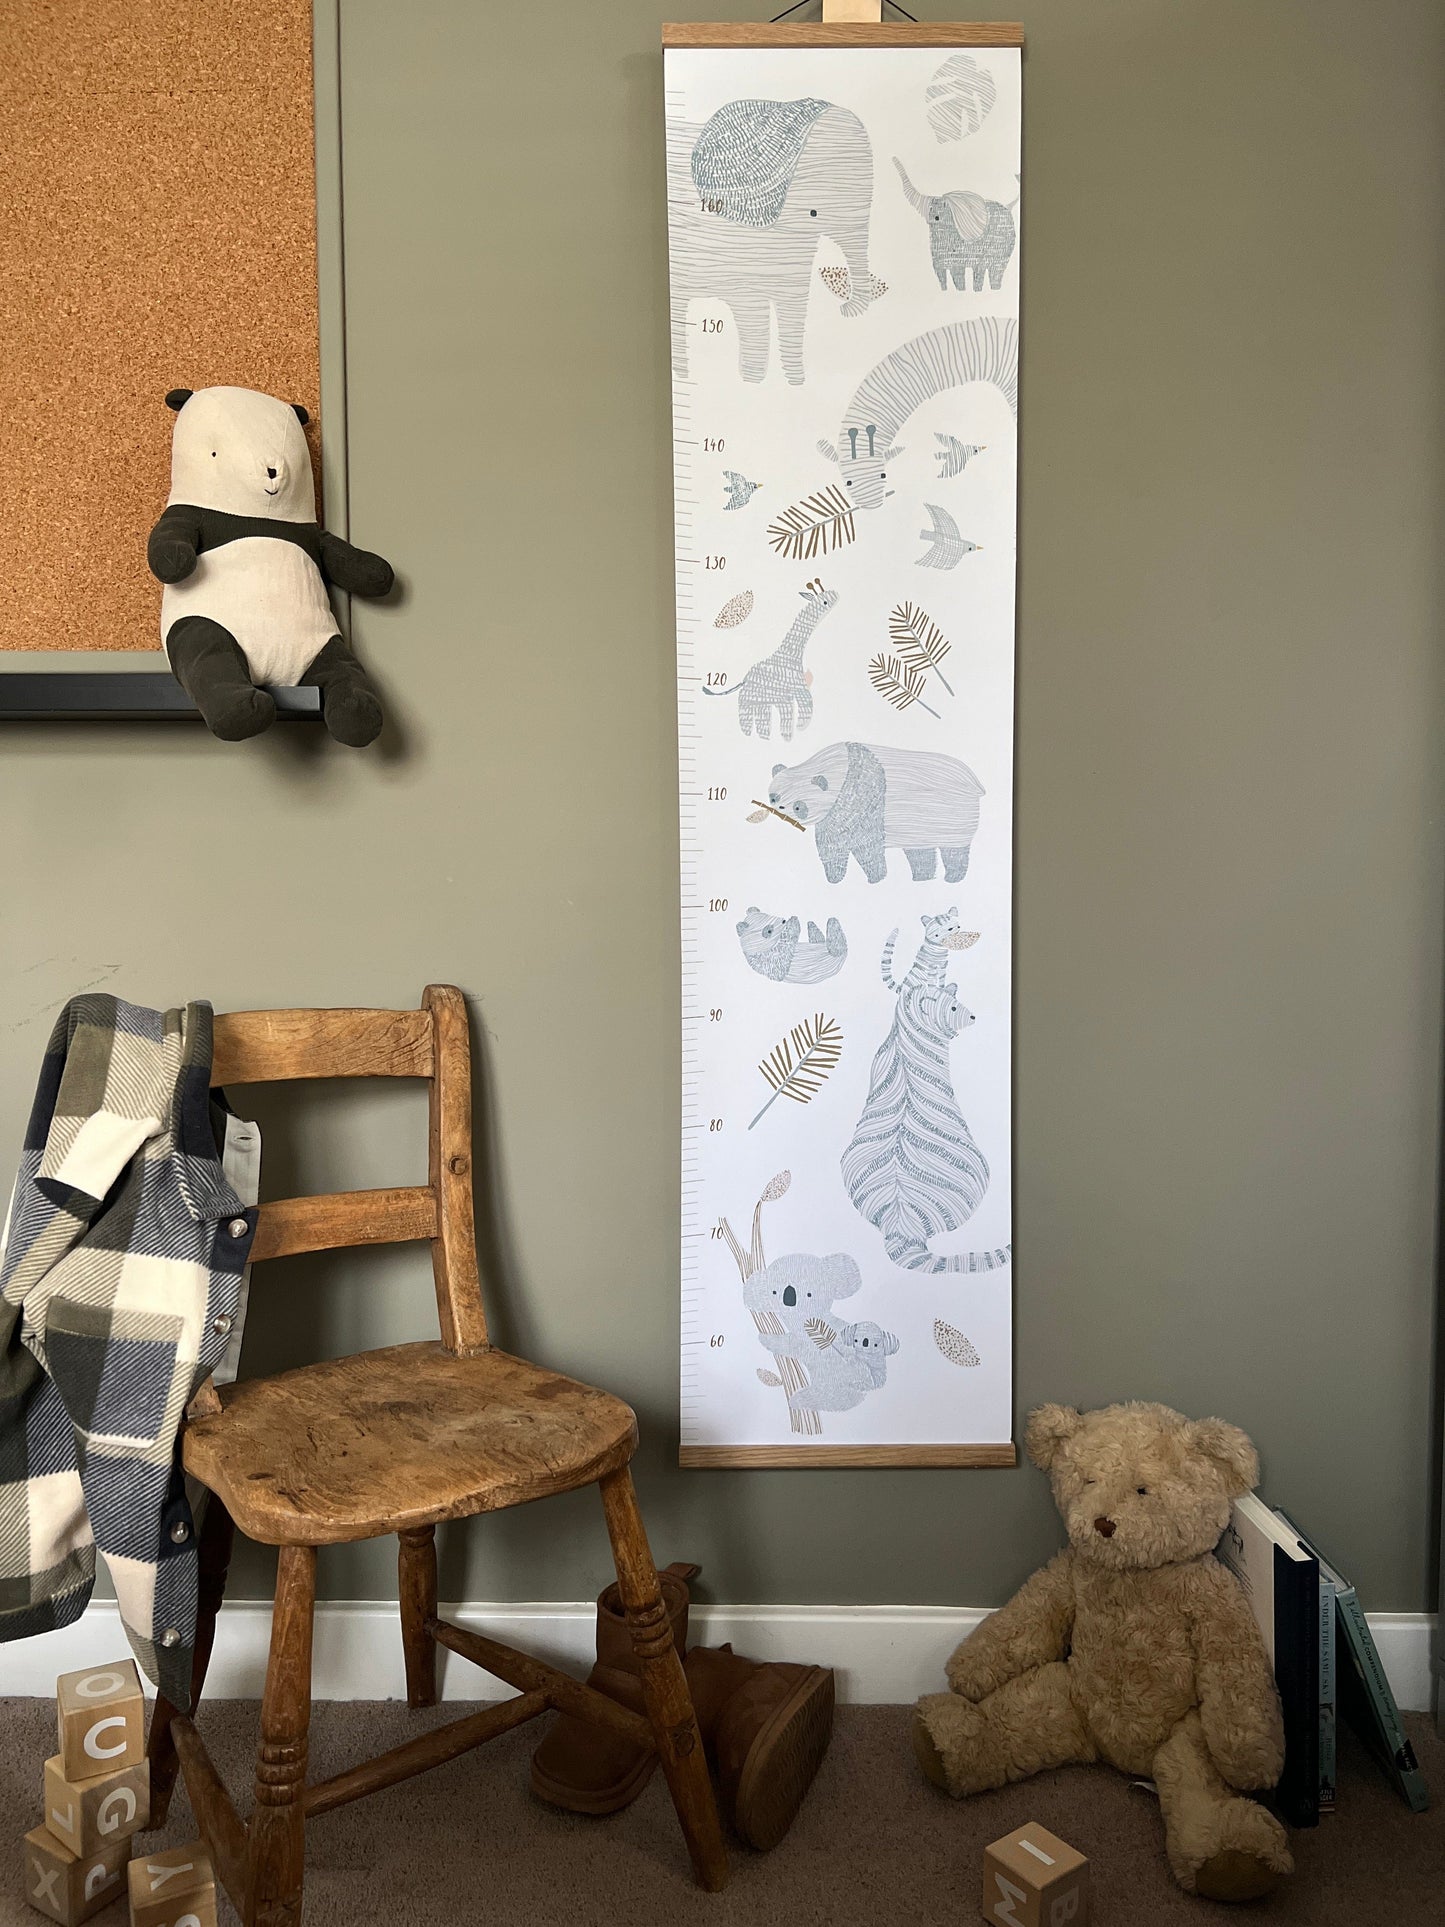 Stripey Safari Height Chart hanging on a green wall next to a vintage wooden child's chair and a teddy on the floor.